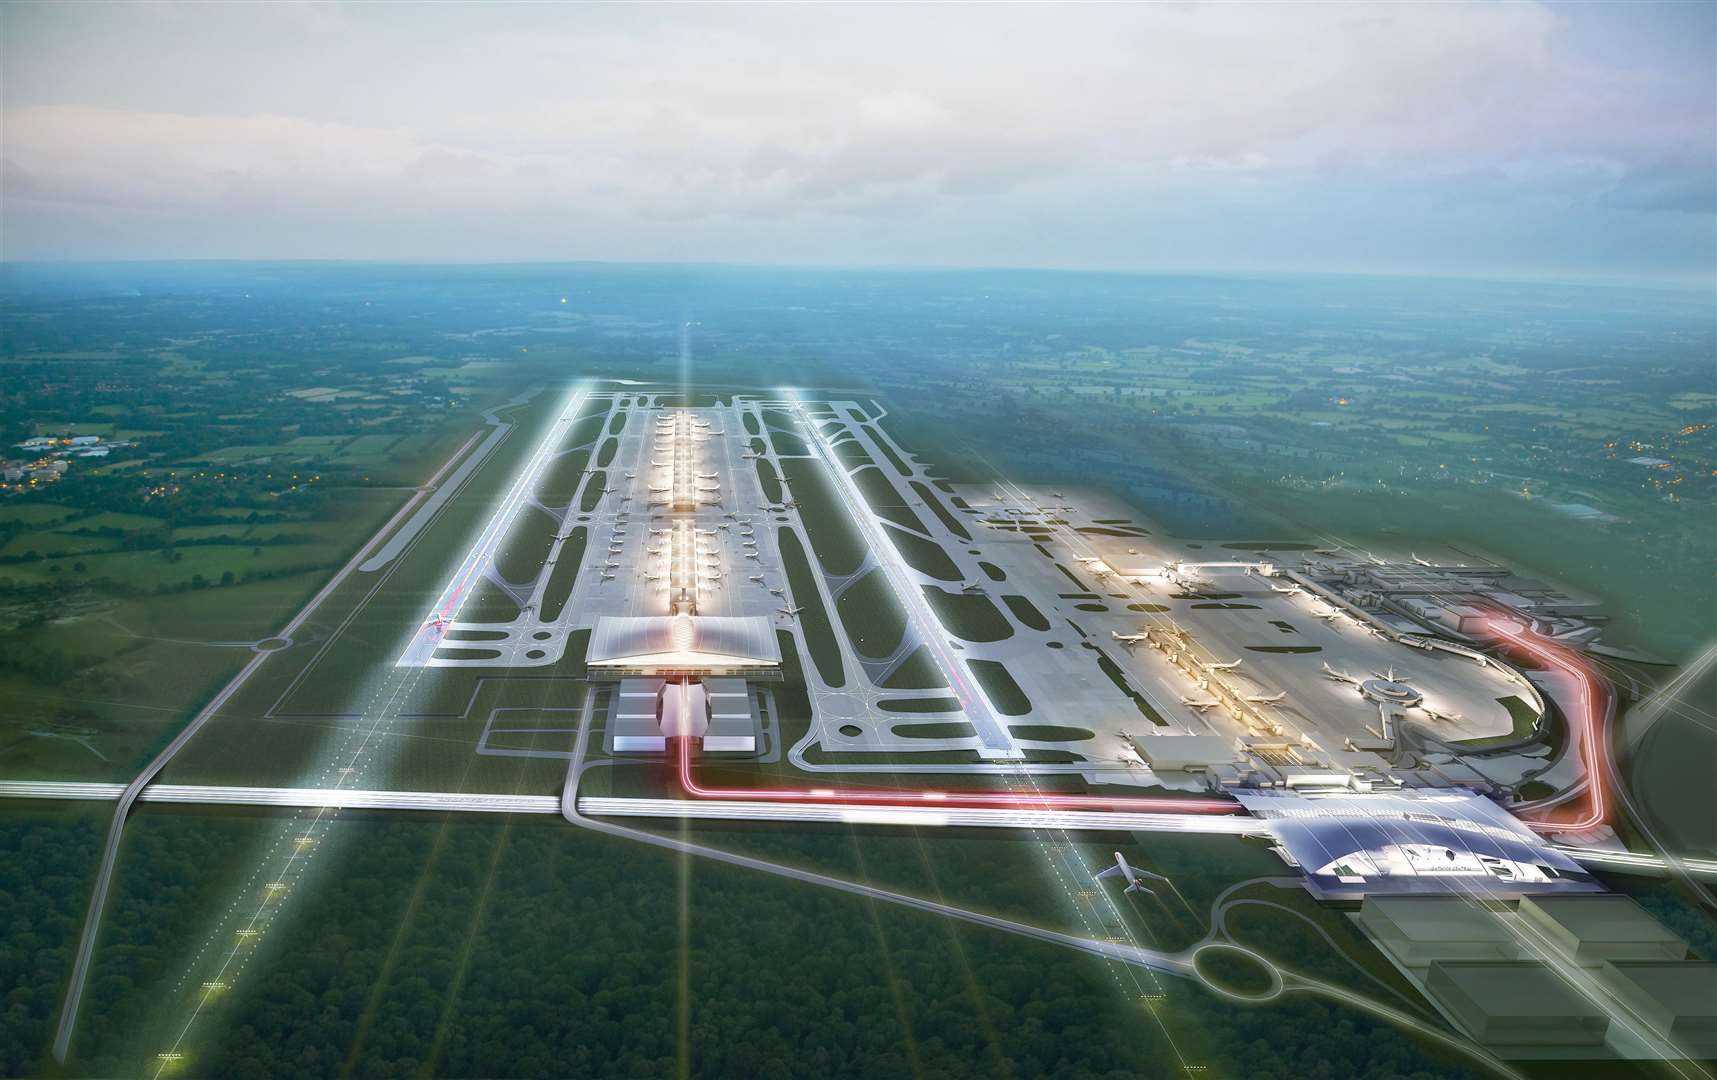 What the proposed second runway at Gatwick would look like.